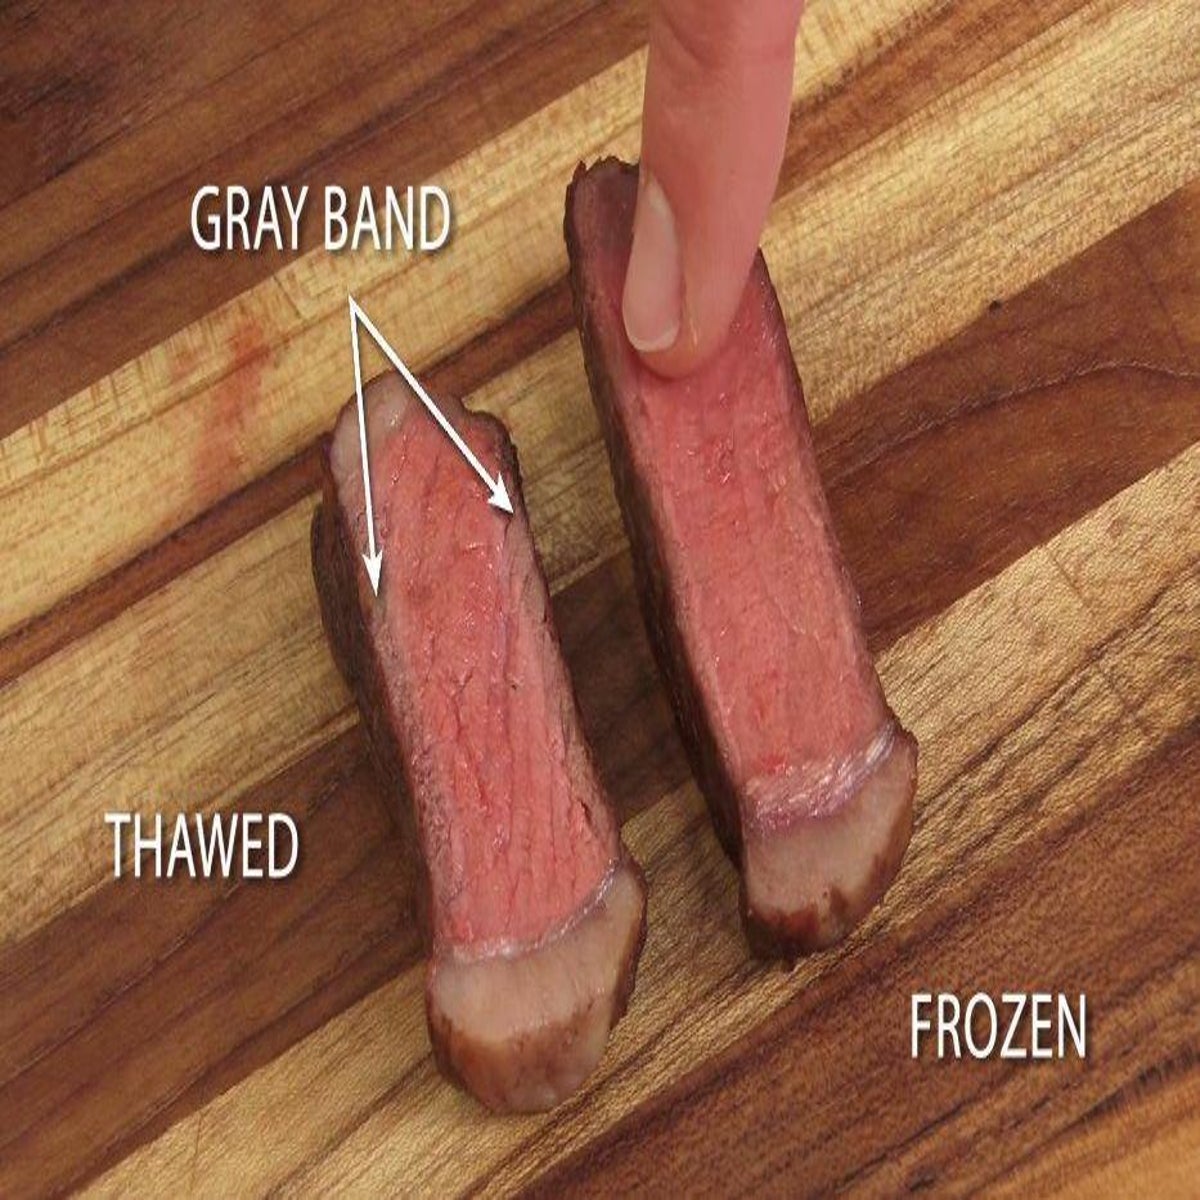 How To Cook Frozen Meat If You Forgot To Defrost